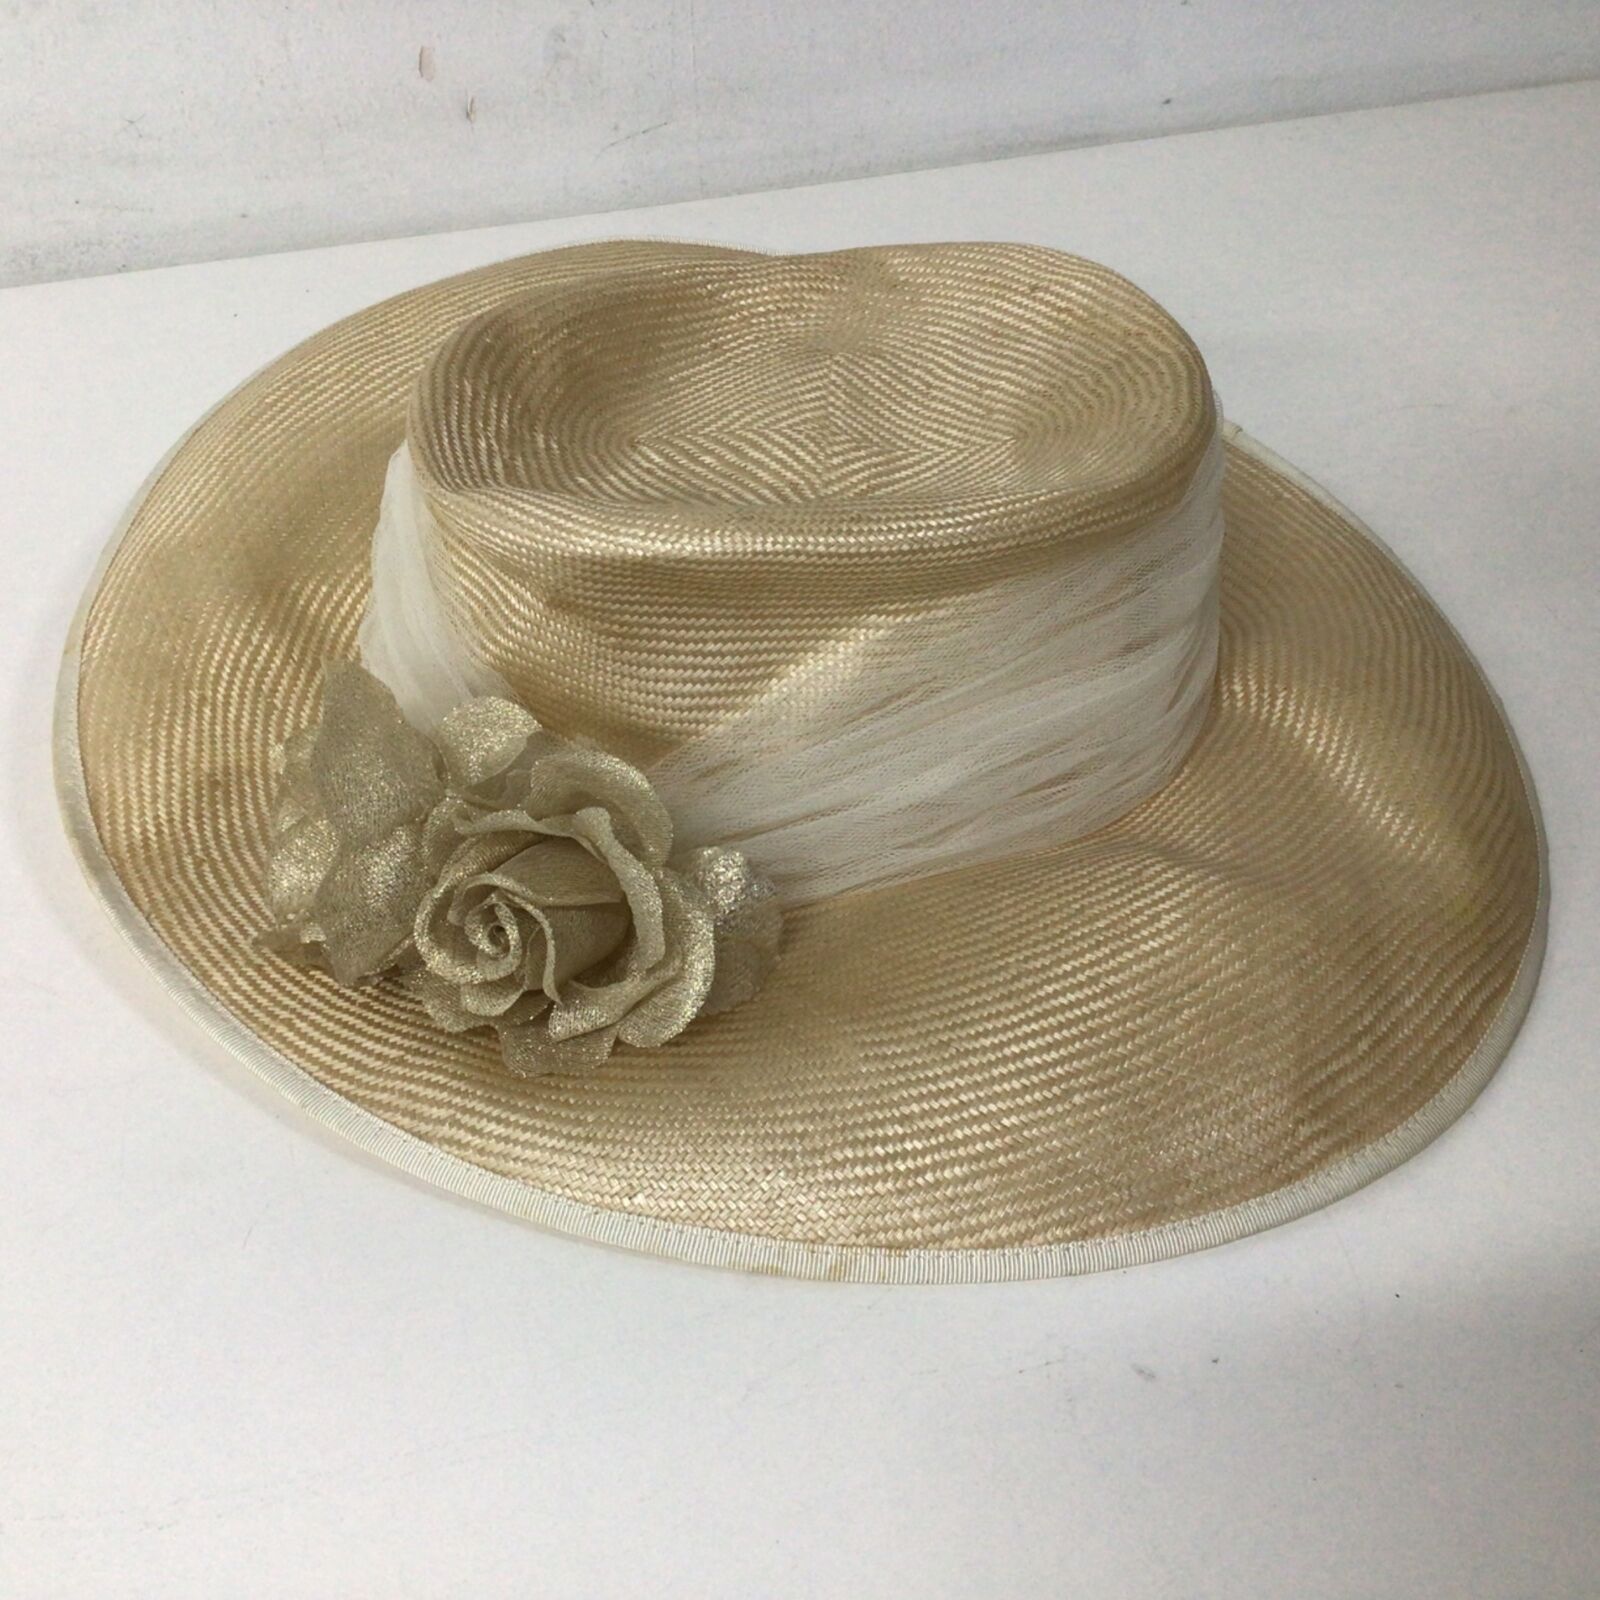 Discount mail order Laura Ashley Natural Straw Hat #694 Choice In Made Britain Great